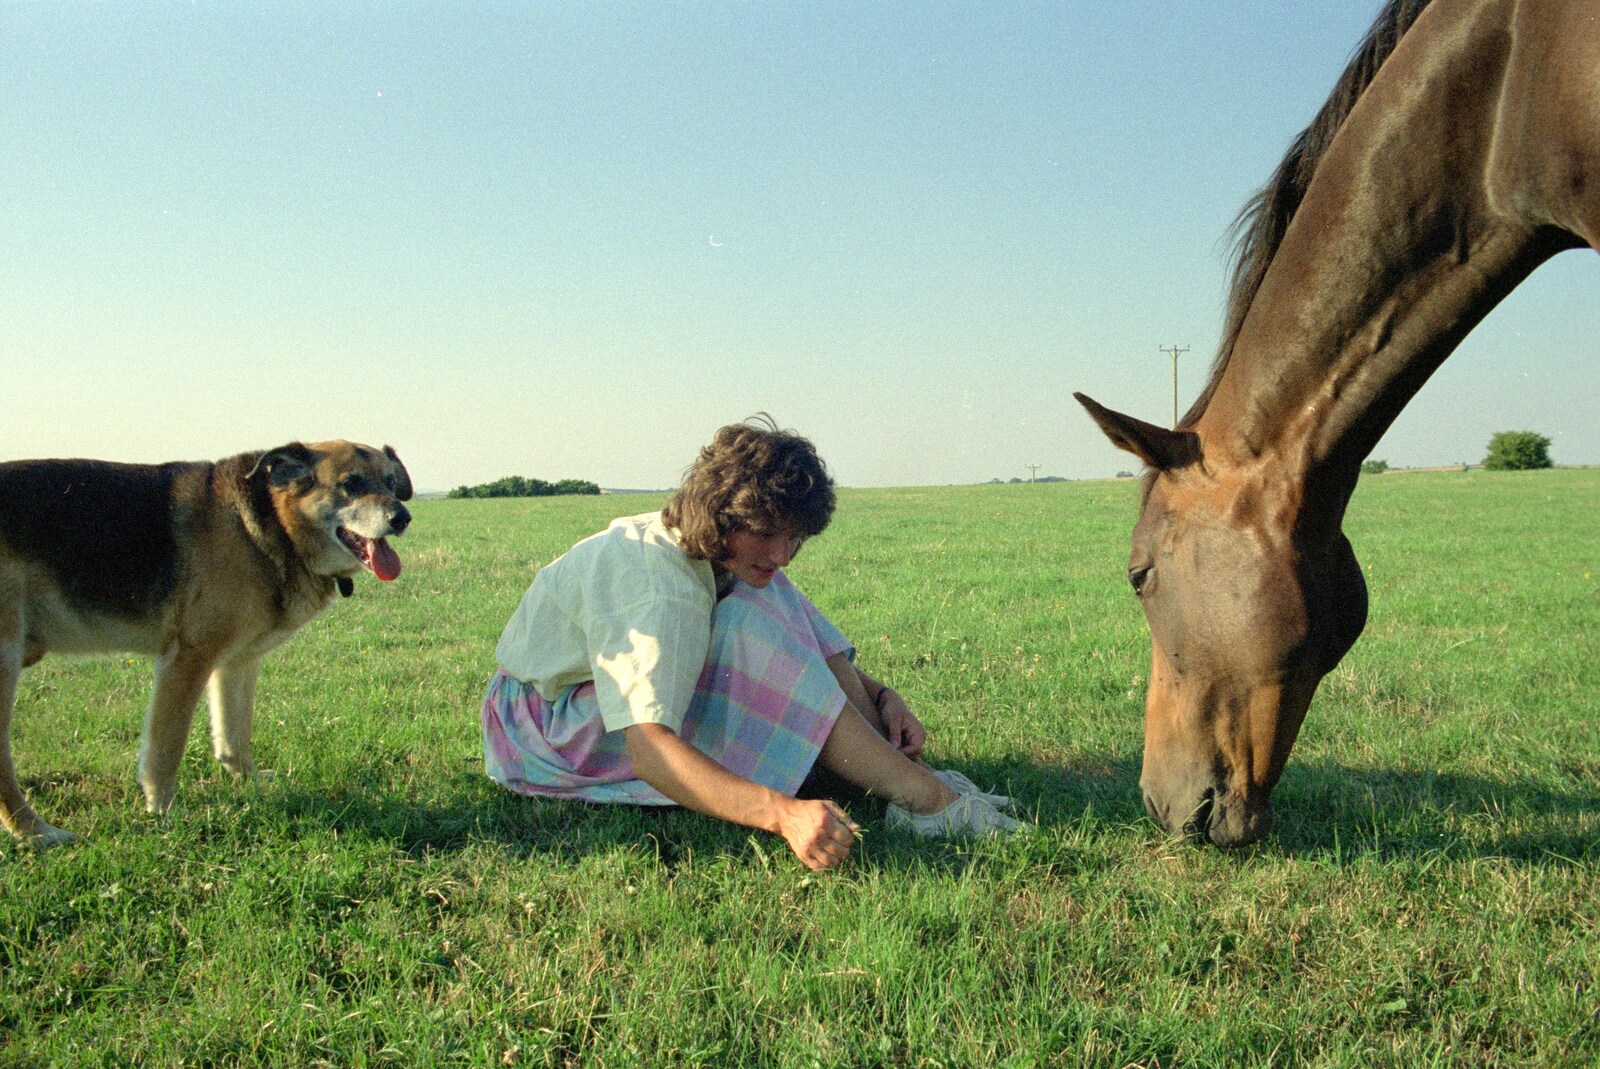 Marty, Angela and Oberon the horse from Summer Days on Pitt Farm, Harbertonford, Devon - 17th July 1989